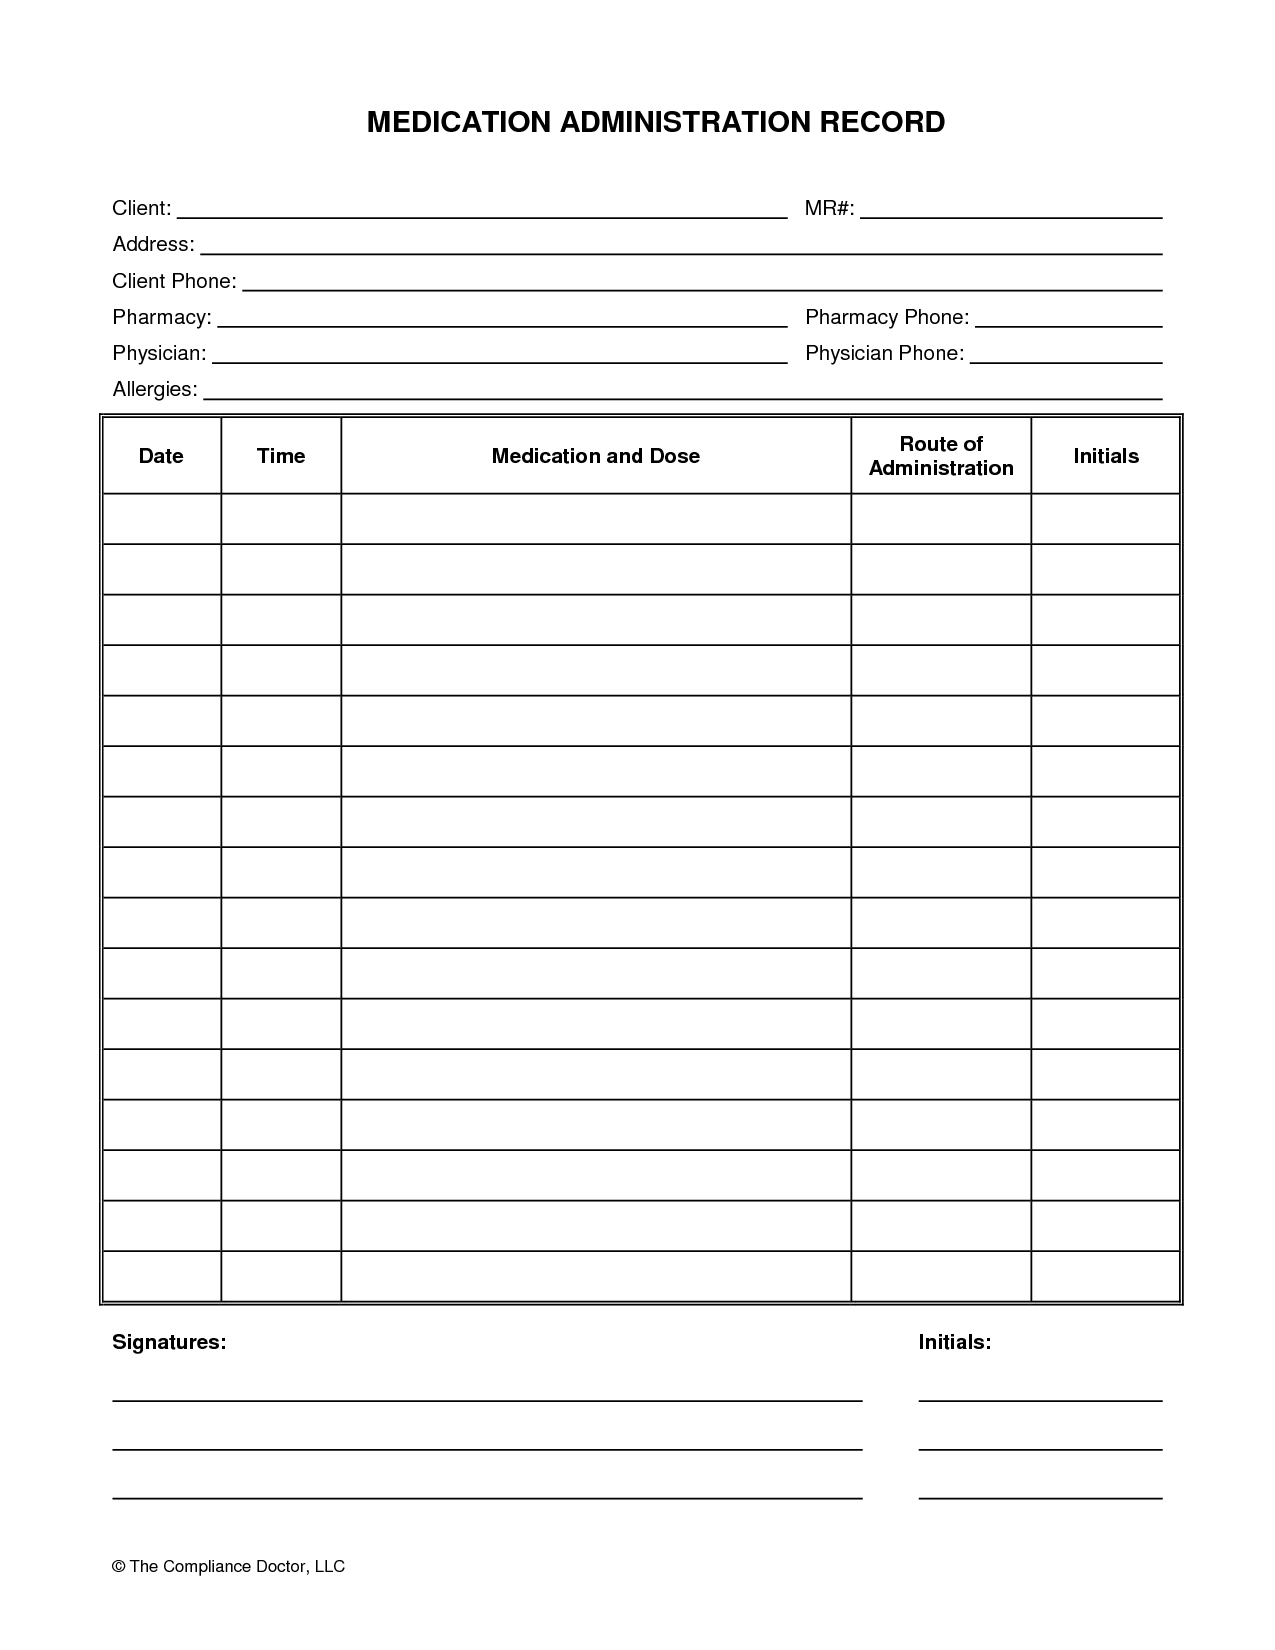 Medication Administration Record Form | Organization | Pinterest - Free Printable Forms For Organizing